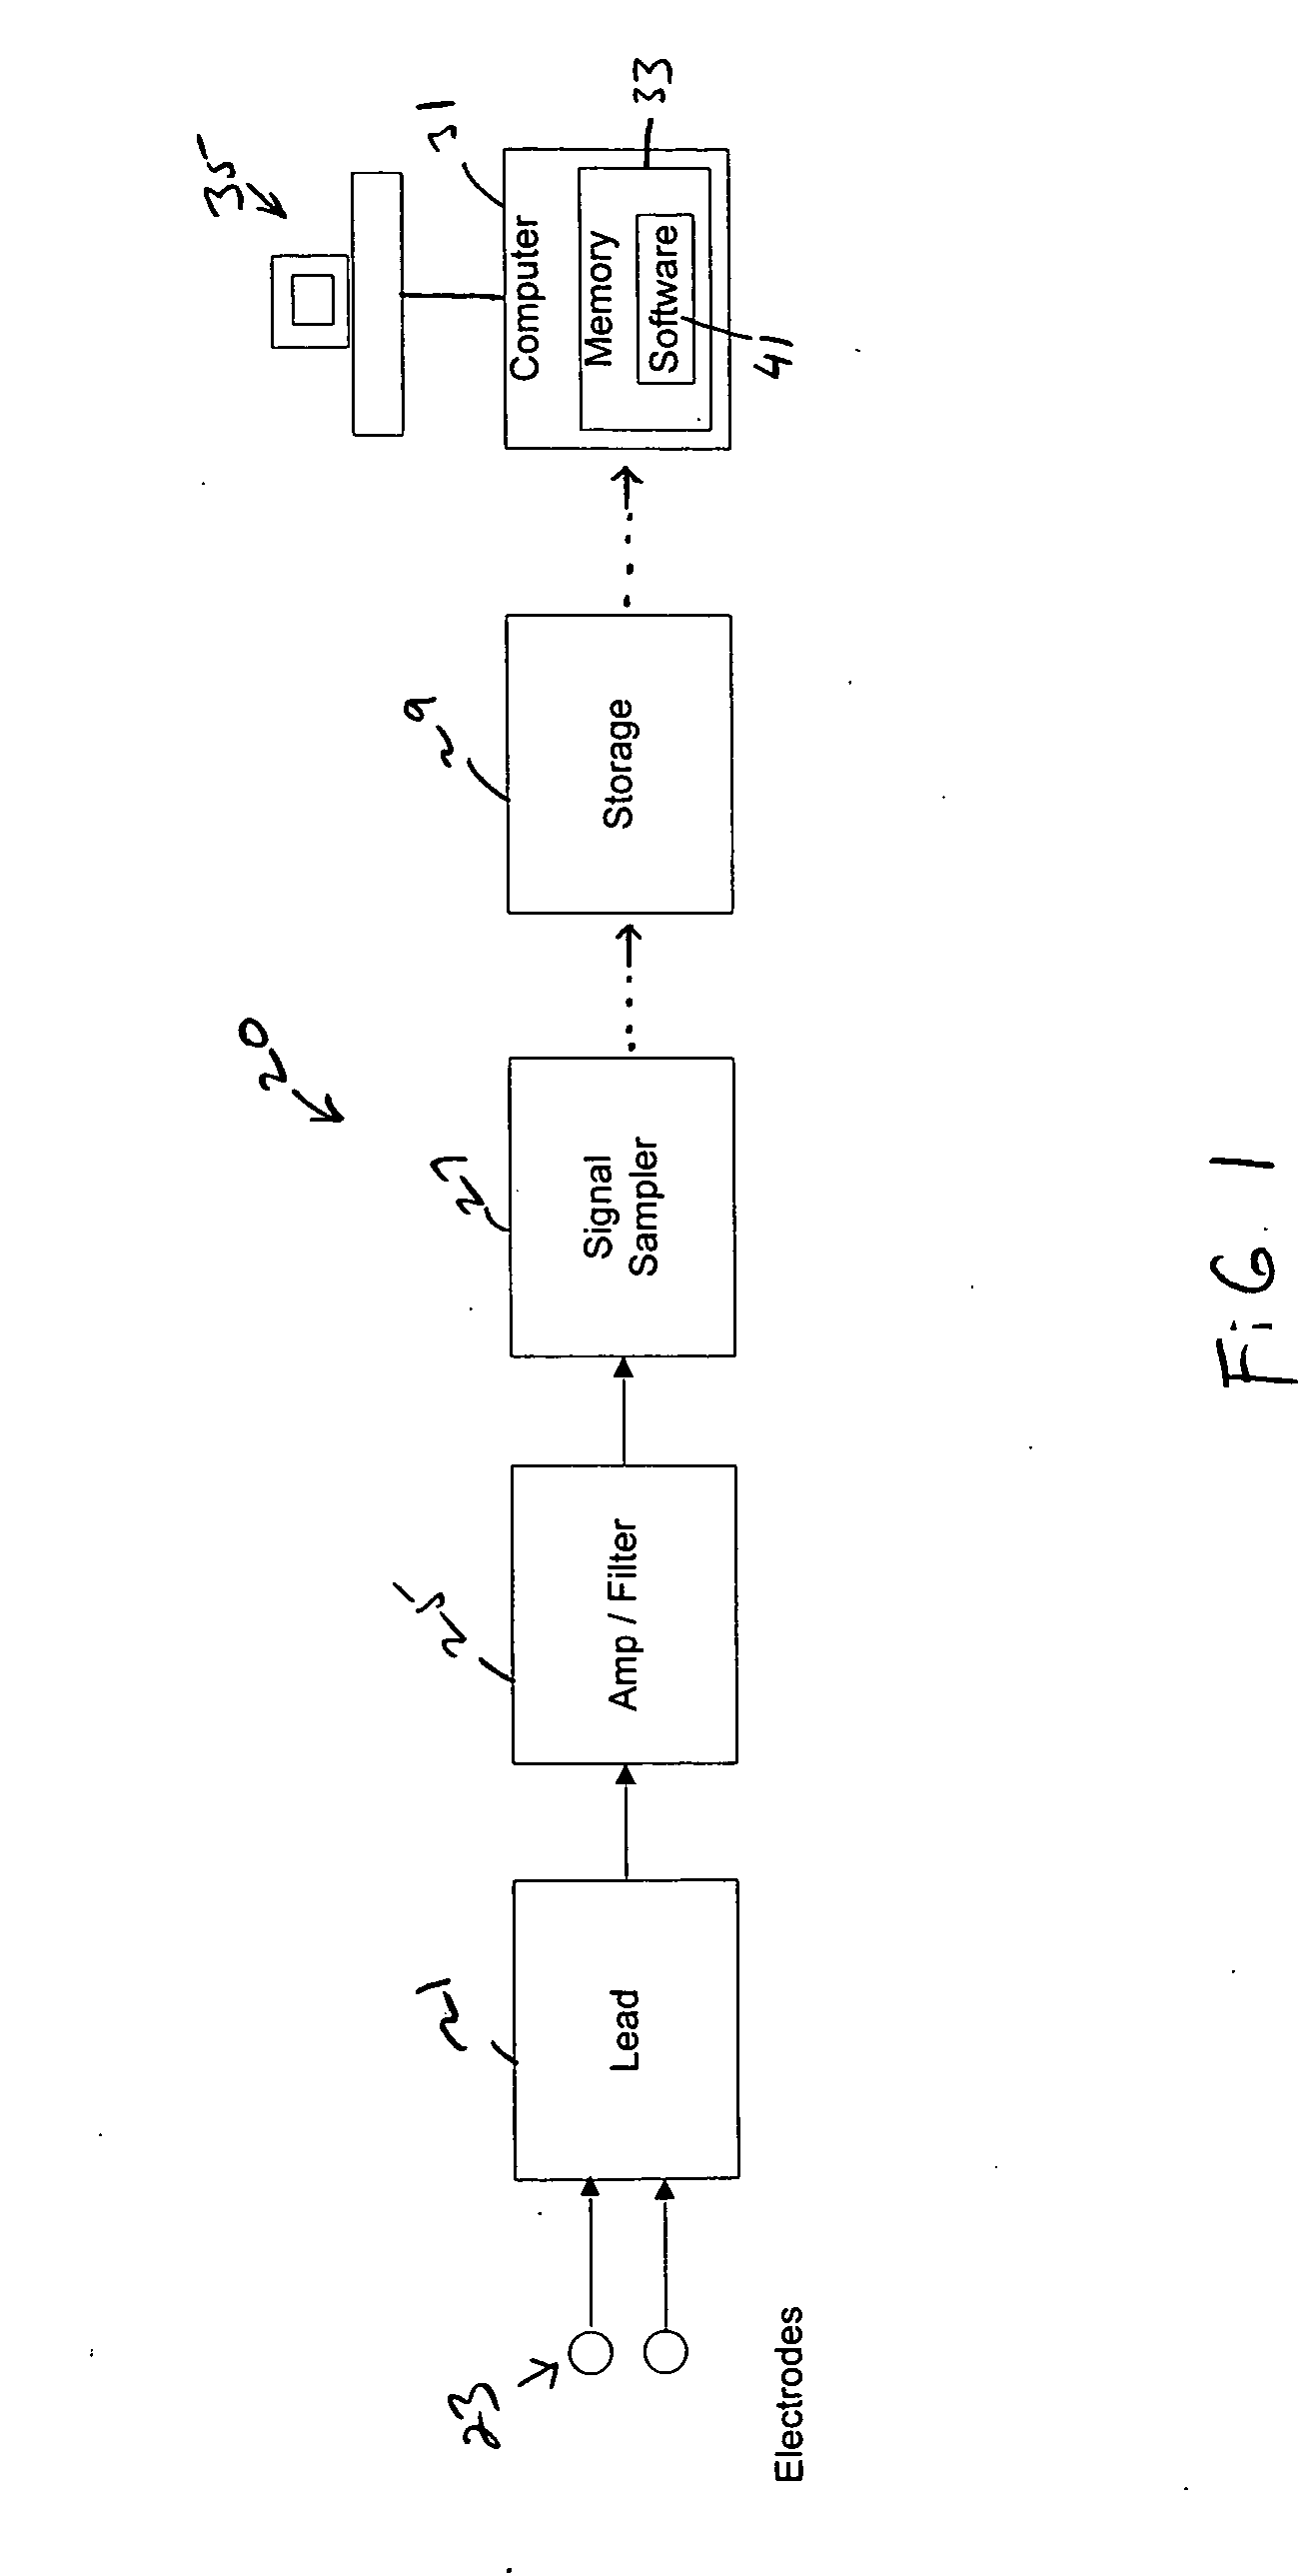 System, software, and method for detection of sleep-disordered breathing using an electrocardiogram